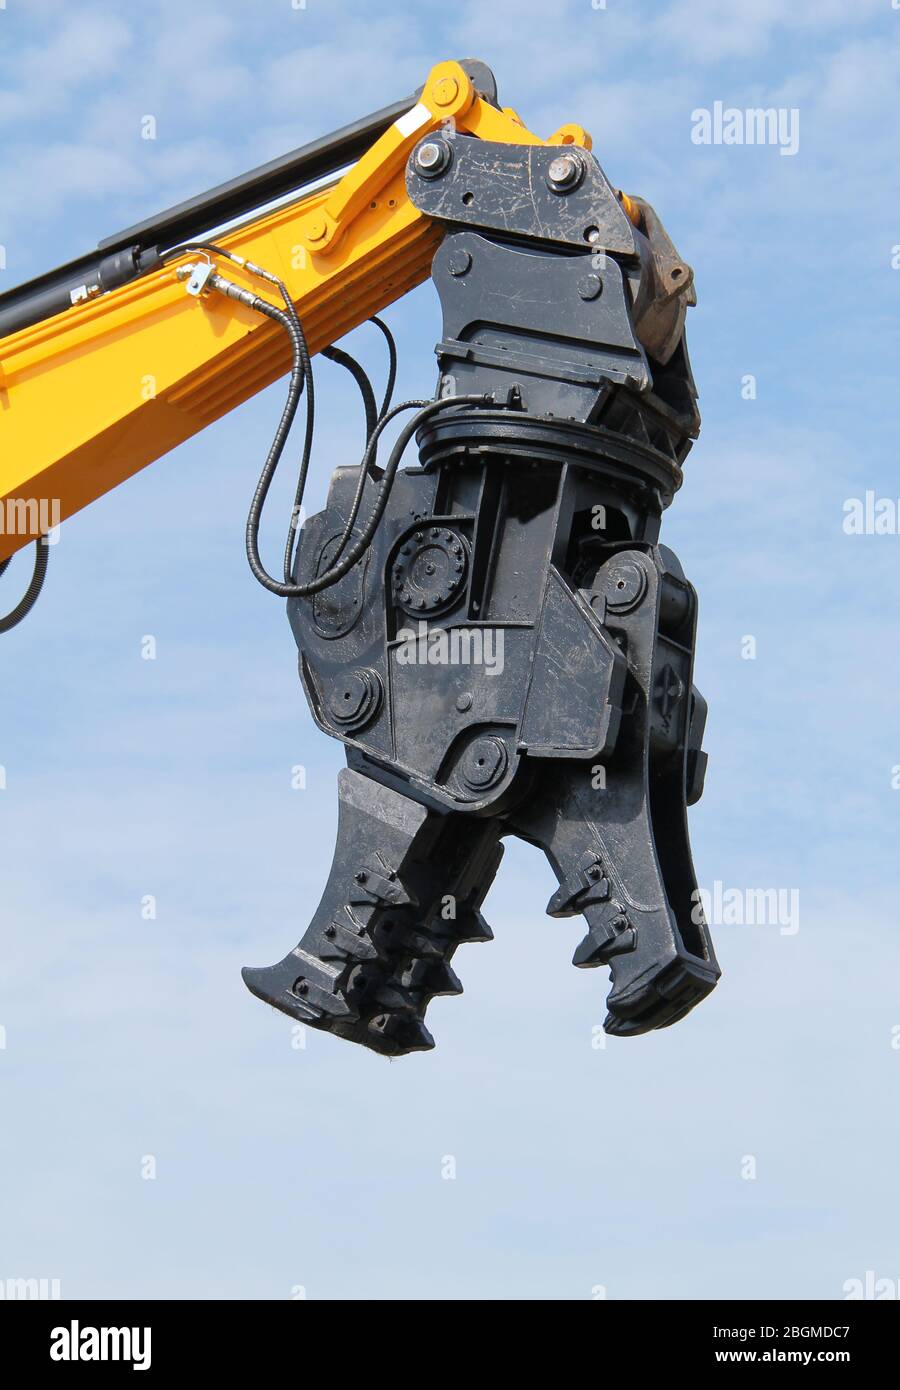 A Hydraulic Rotating Pulveriser Attachment for Demolition. Stock Photo